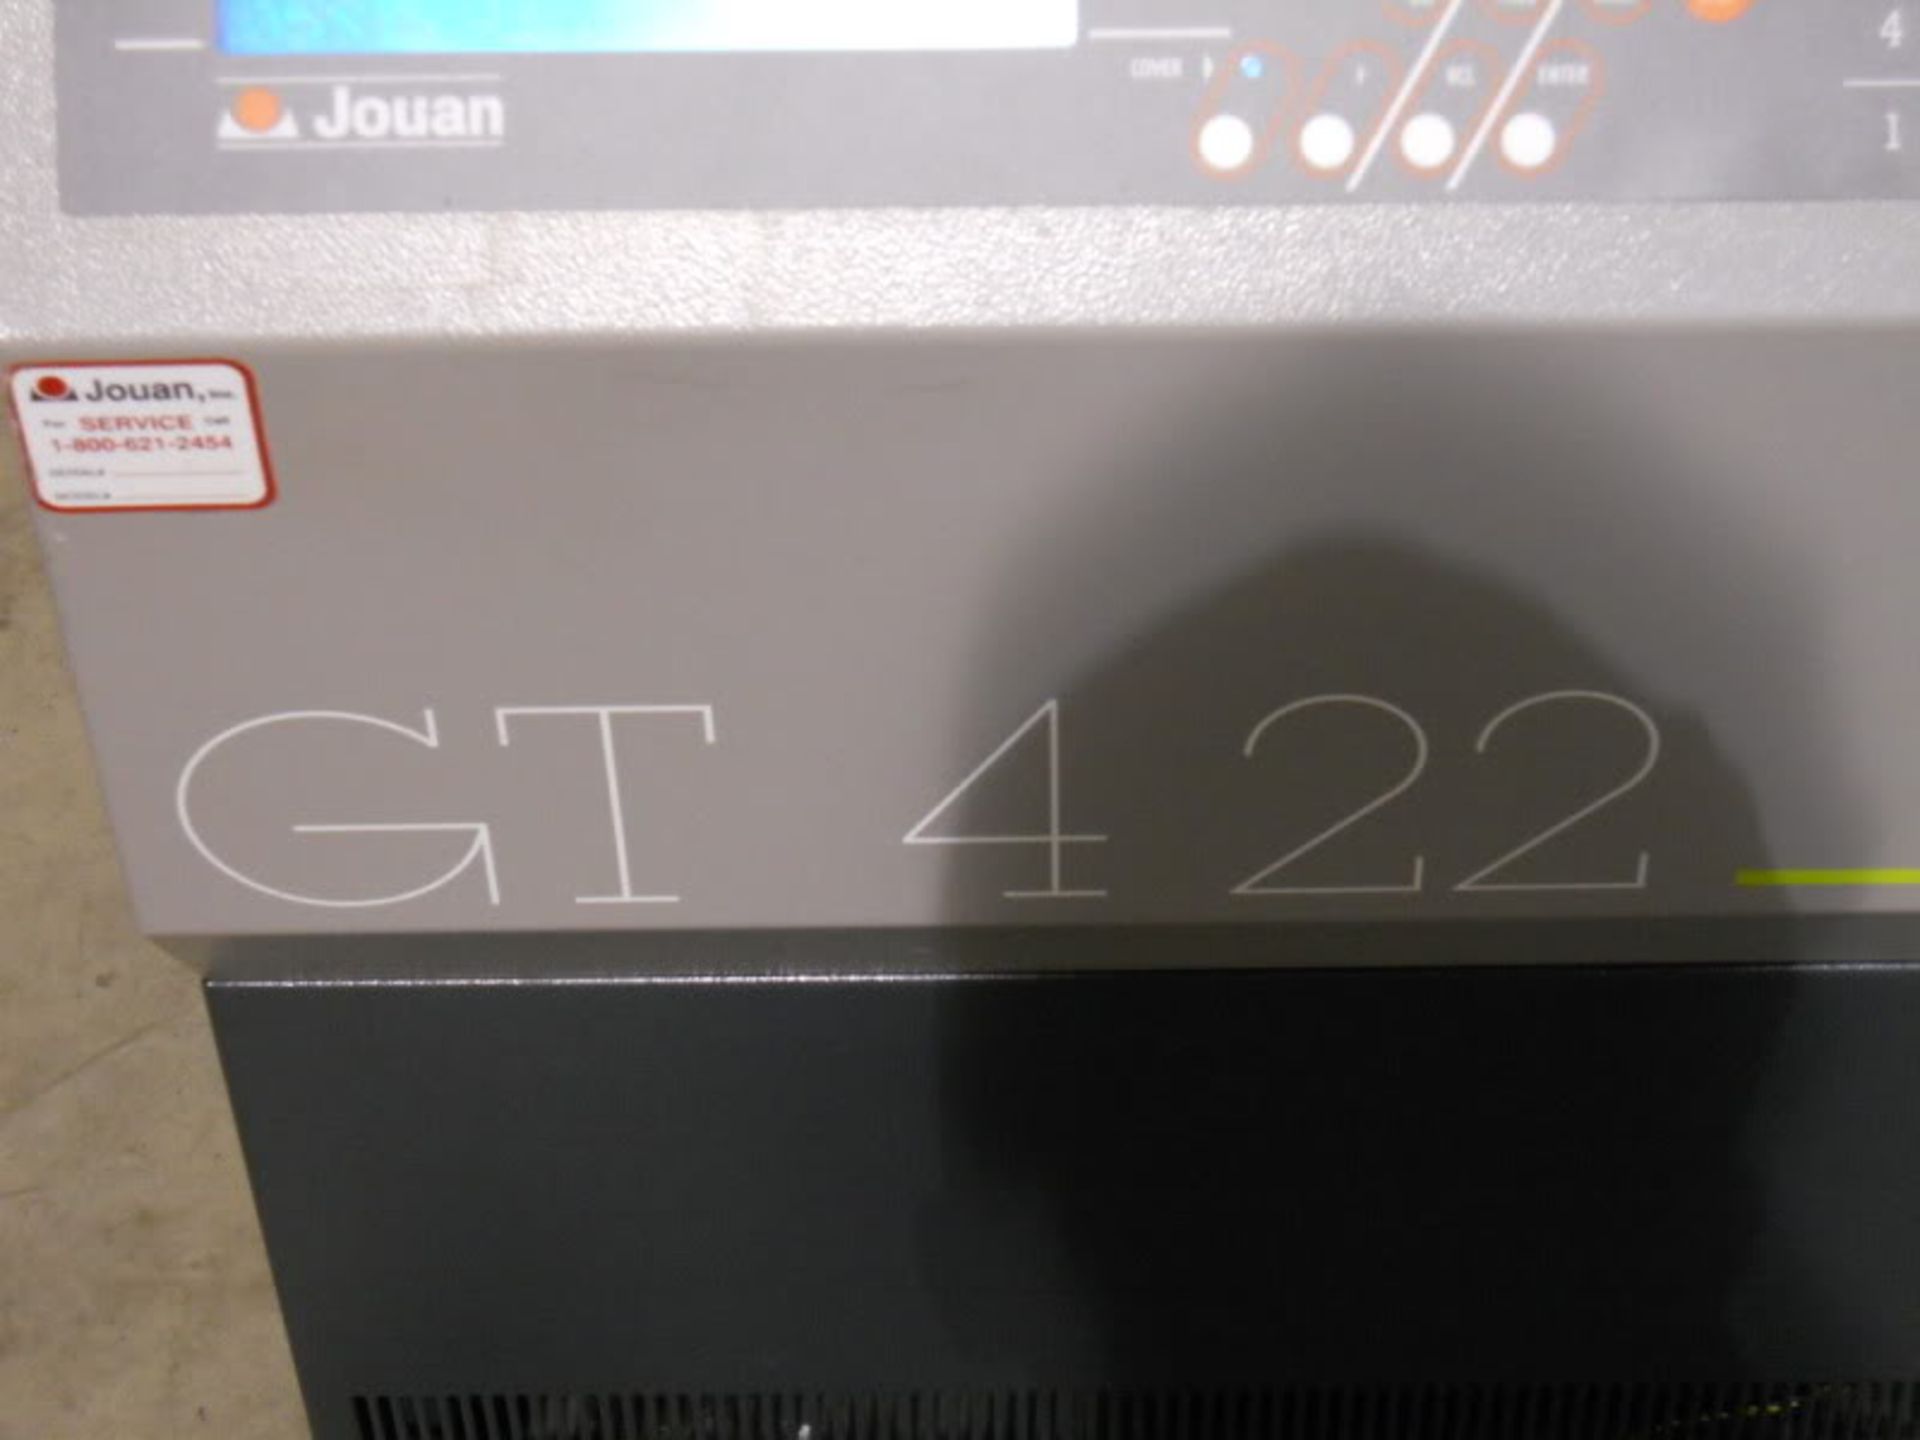 Jouan GT4-22 Refrigerated Centrifuge (Parts) Doesn't Get Cold, Qty 1, 221116409446 - Image 4 of 10